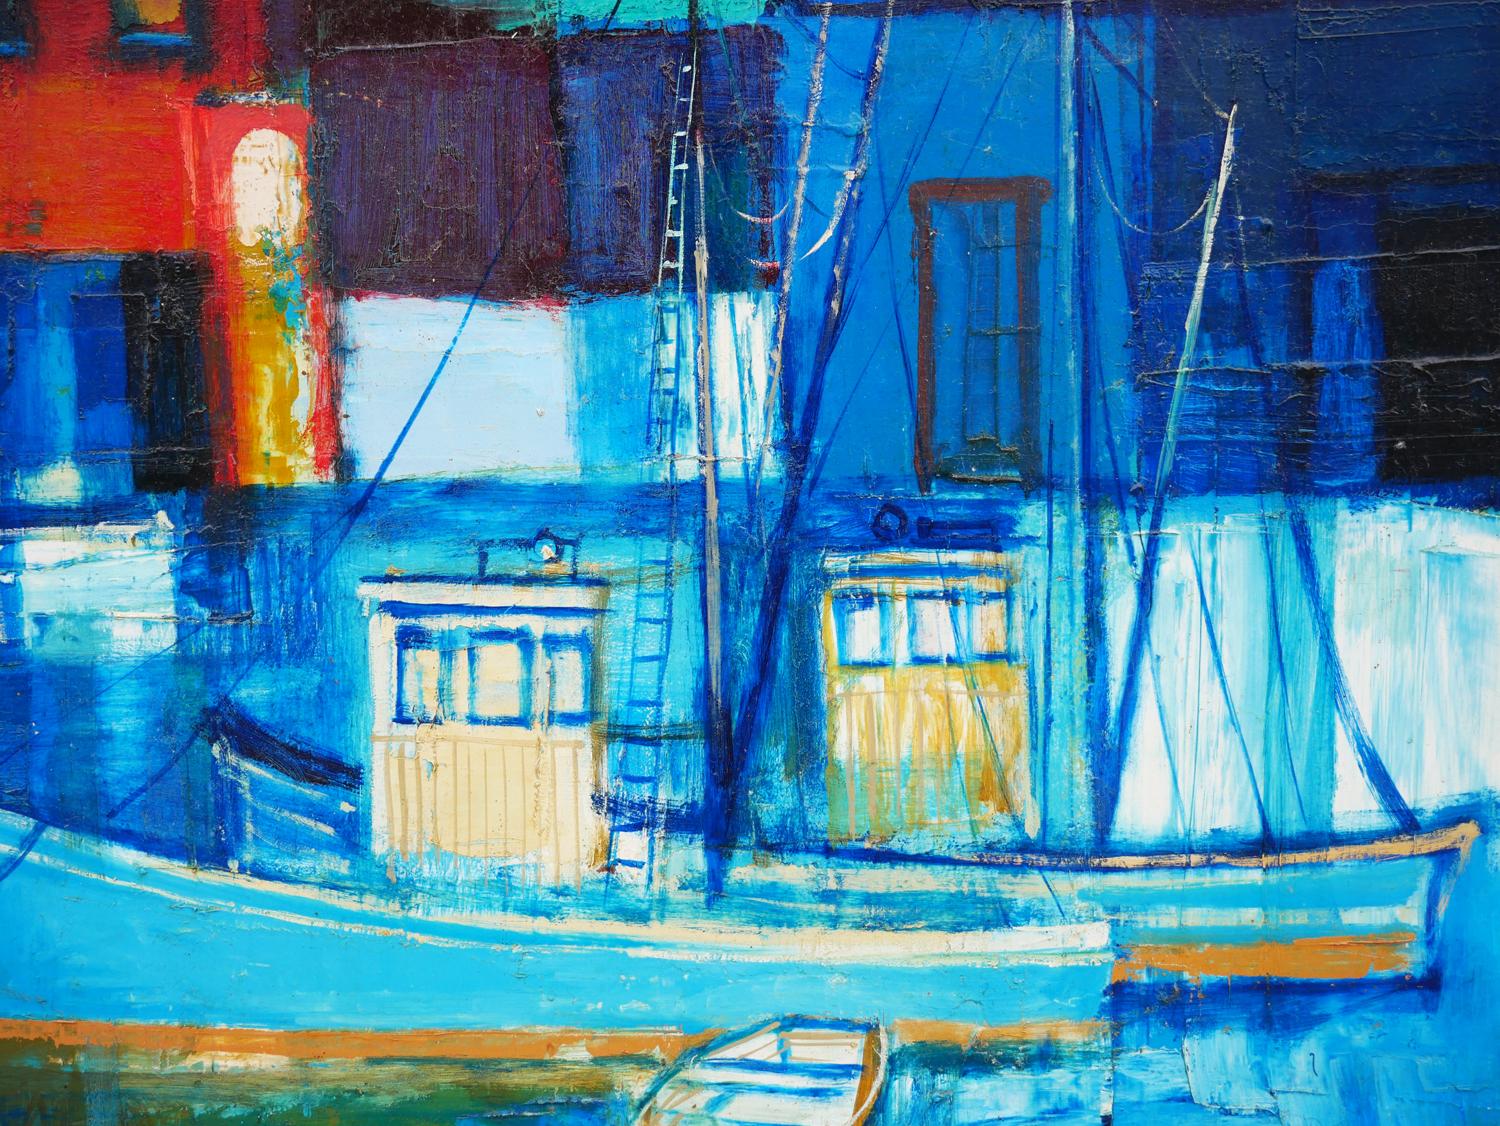 Modern Blue-Toned Abstract Coastal Cityscape Landscape with Boats at a Dock 5